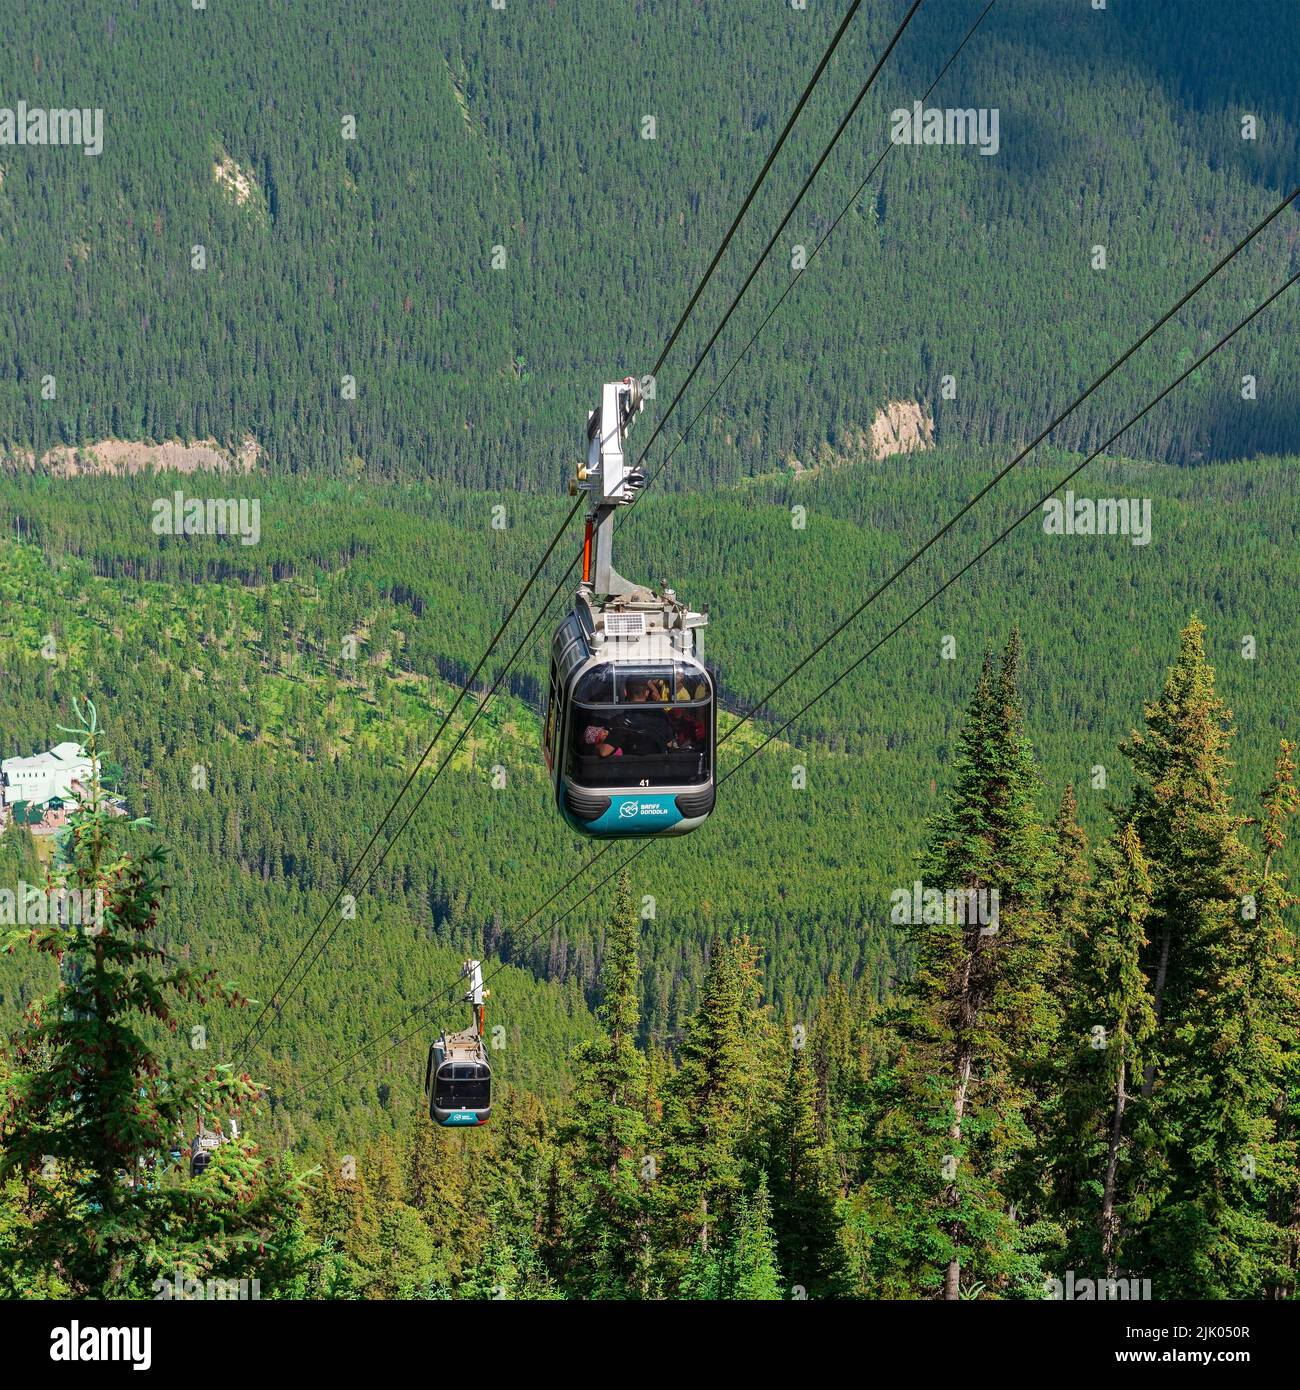 Cable car of Banff Gondola above pine tree forest, Banff national park, Alberta, Canada. Stock Photo